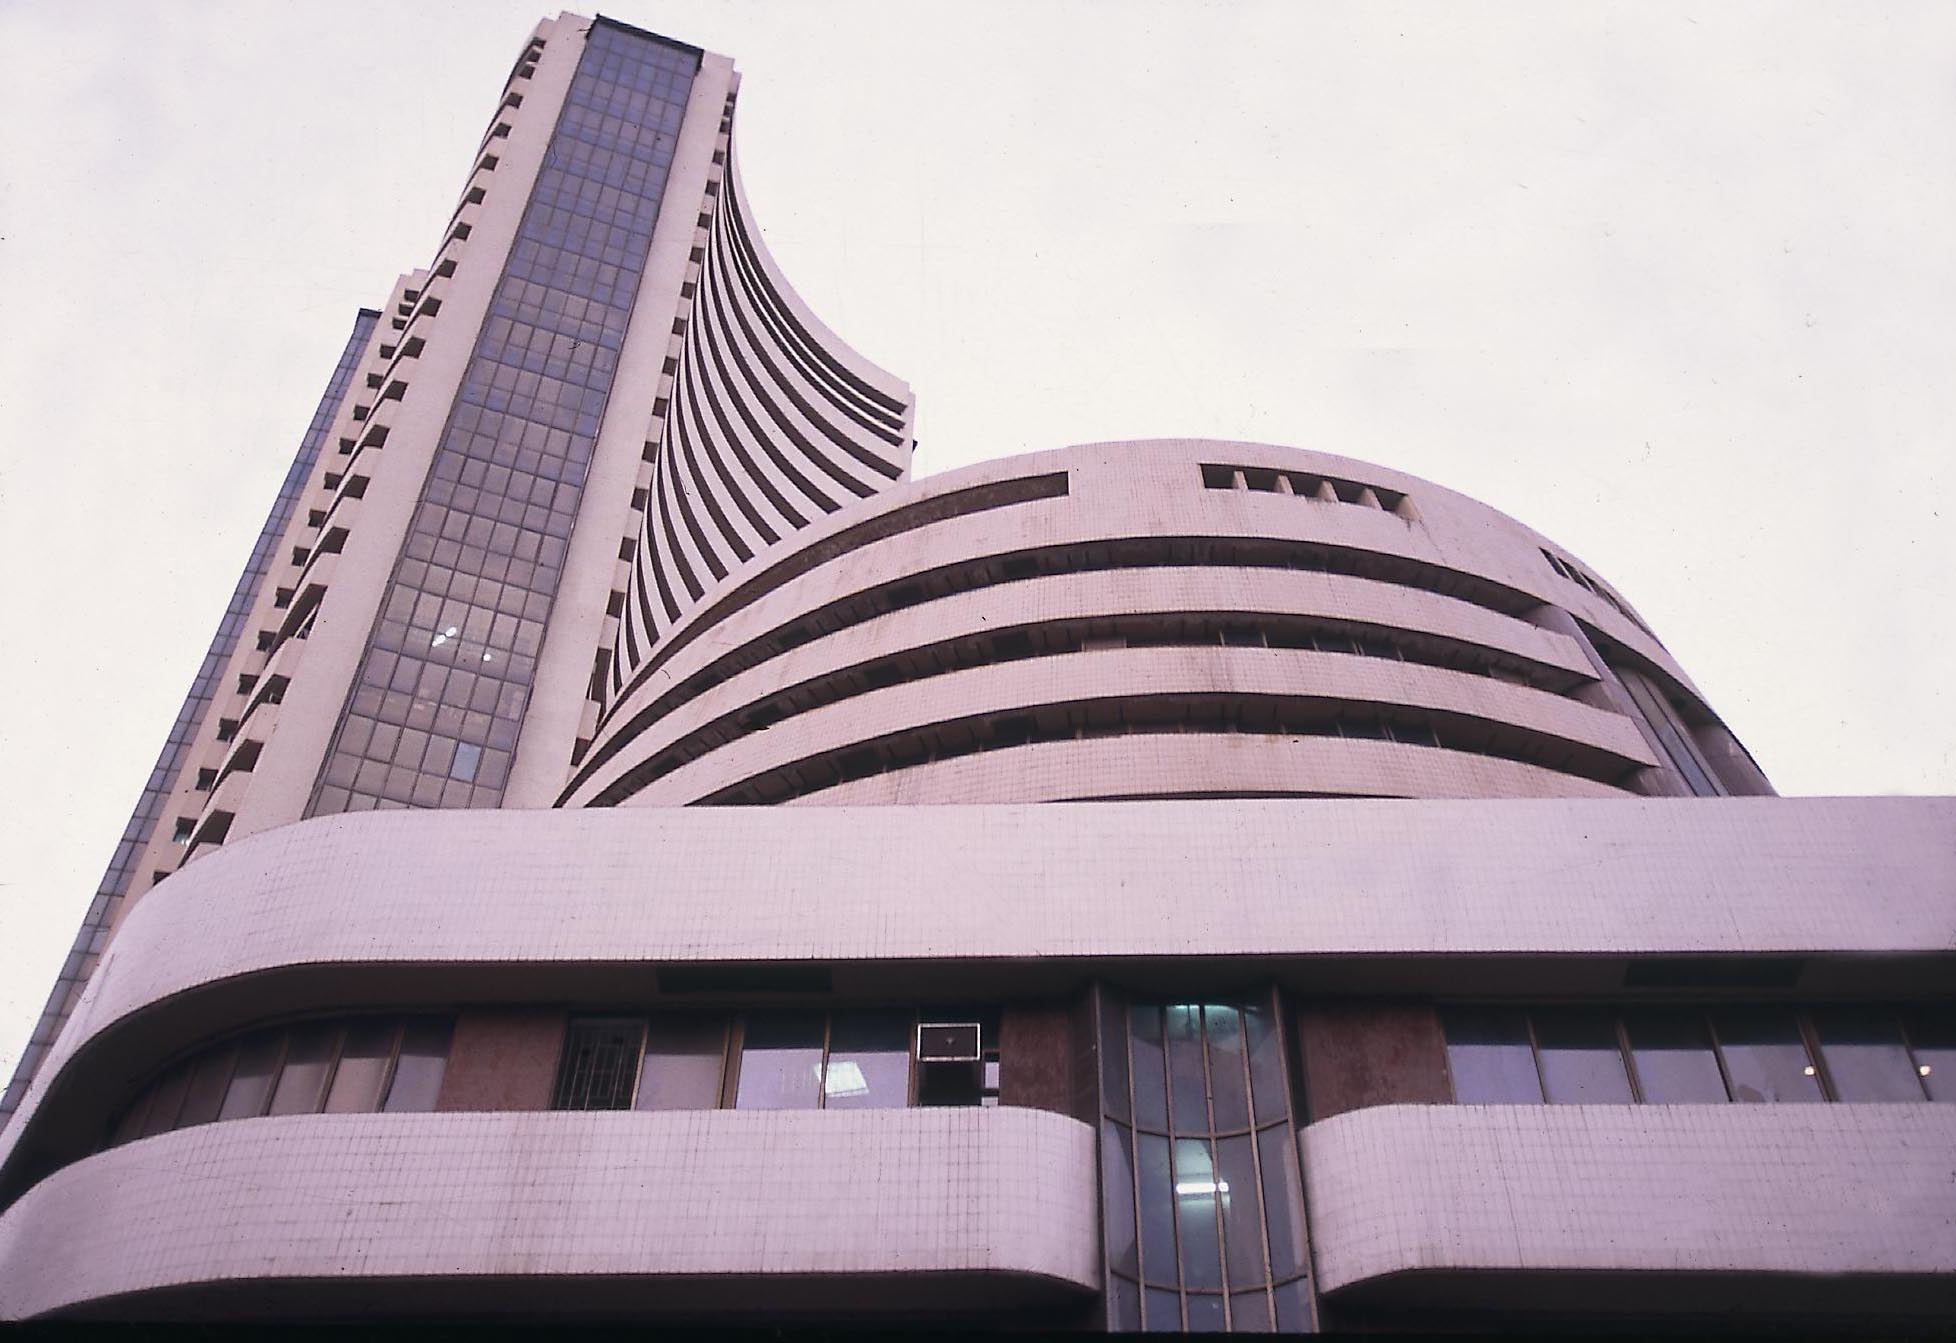 Bajaj Finance was the top laggard in the Sensex pack, plunging around 6 per cent, followed by IndusInd Bank, SBI, M&M, Axis Bank, Bajaj Auto and ICICI Bank.